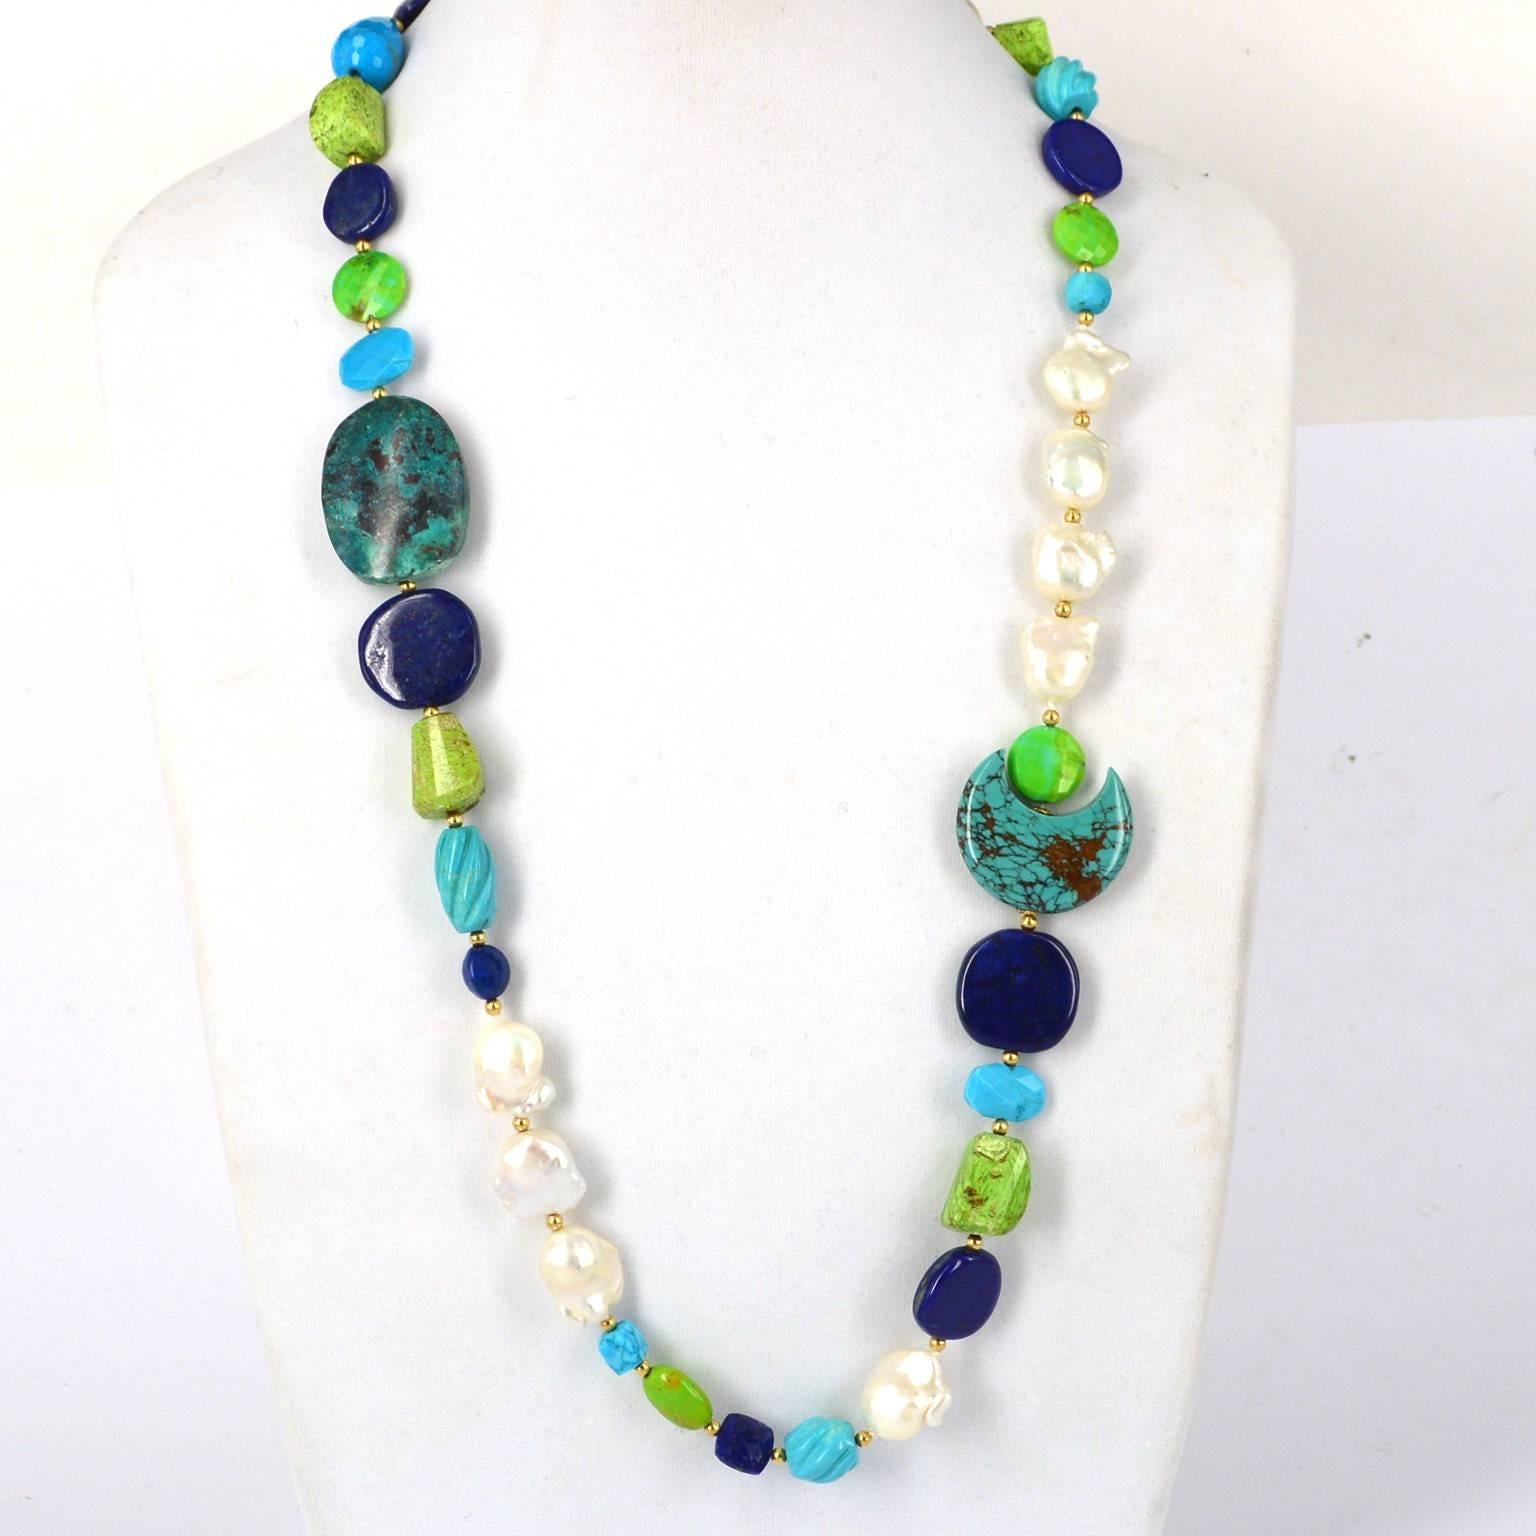 Delicious mix of green and blues highlighted with Fresh Water Keshi Pearls and 14k Gold filled beads. Lapis Lazuli beads are all natural colour and a mix of polished and faceted finish, large polished oval natural Chrysocolla 33x25mm  bead, 3/4 moon